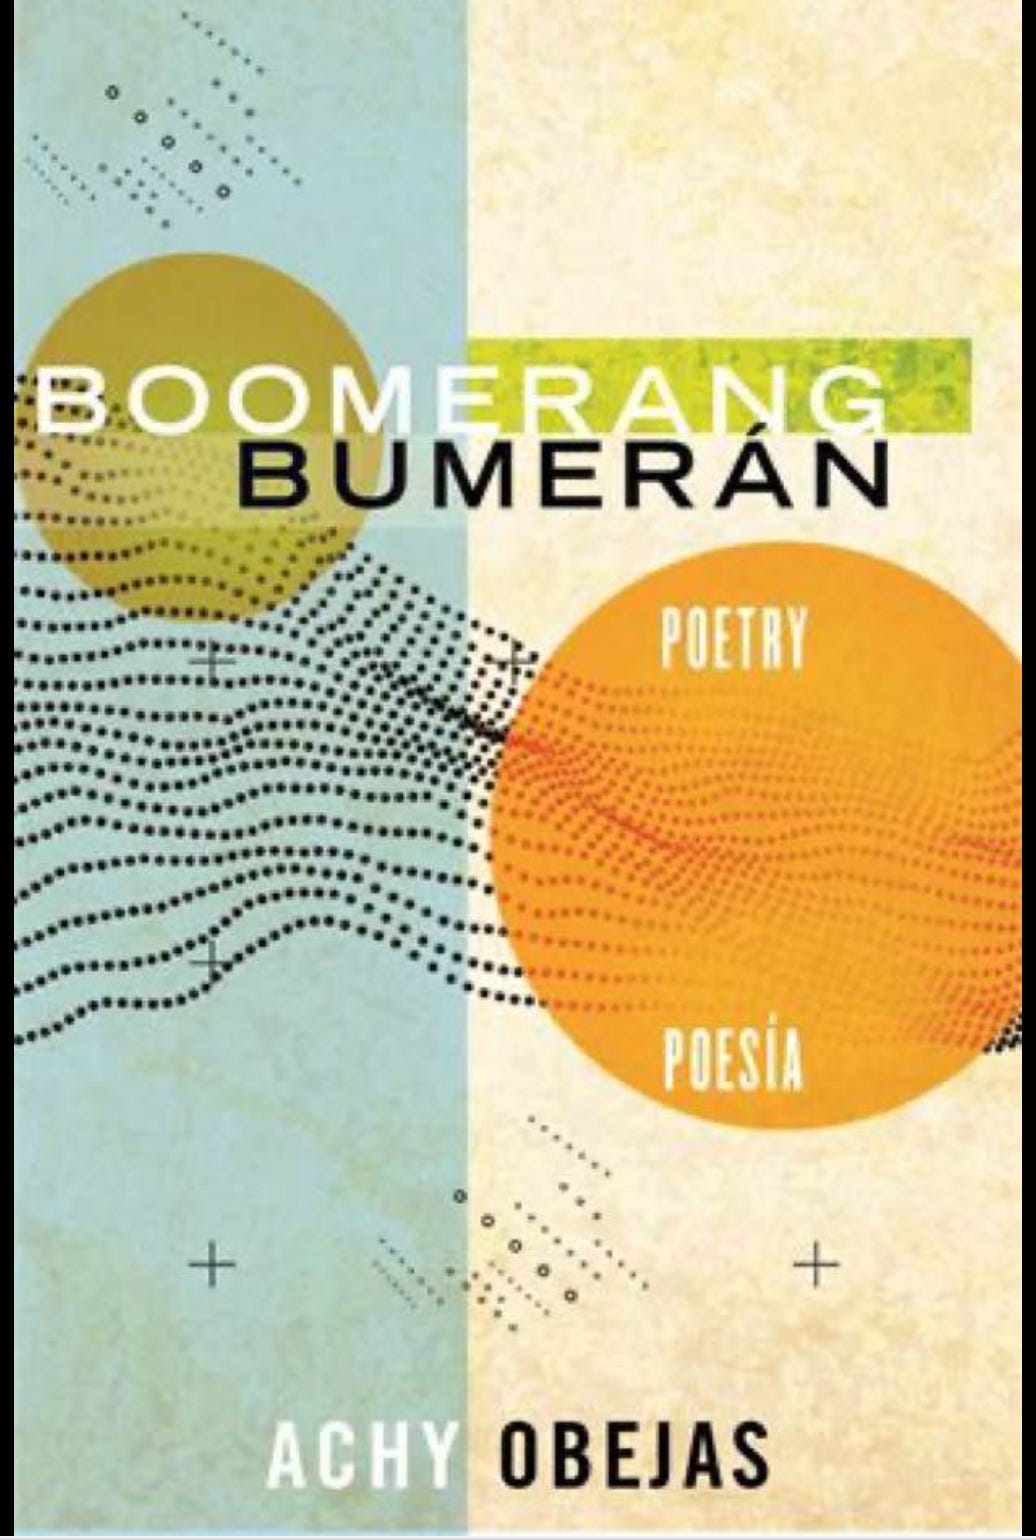 This is the cover of Boomerang/Bumerán by Achy Obejas